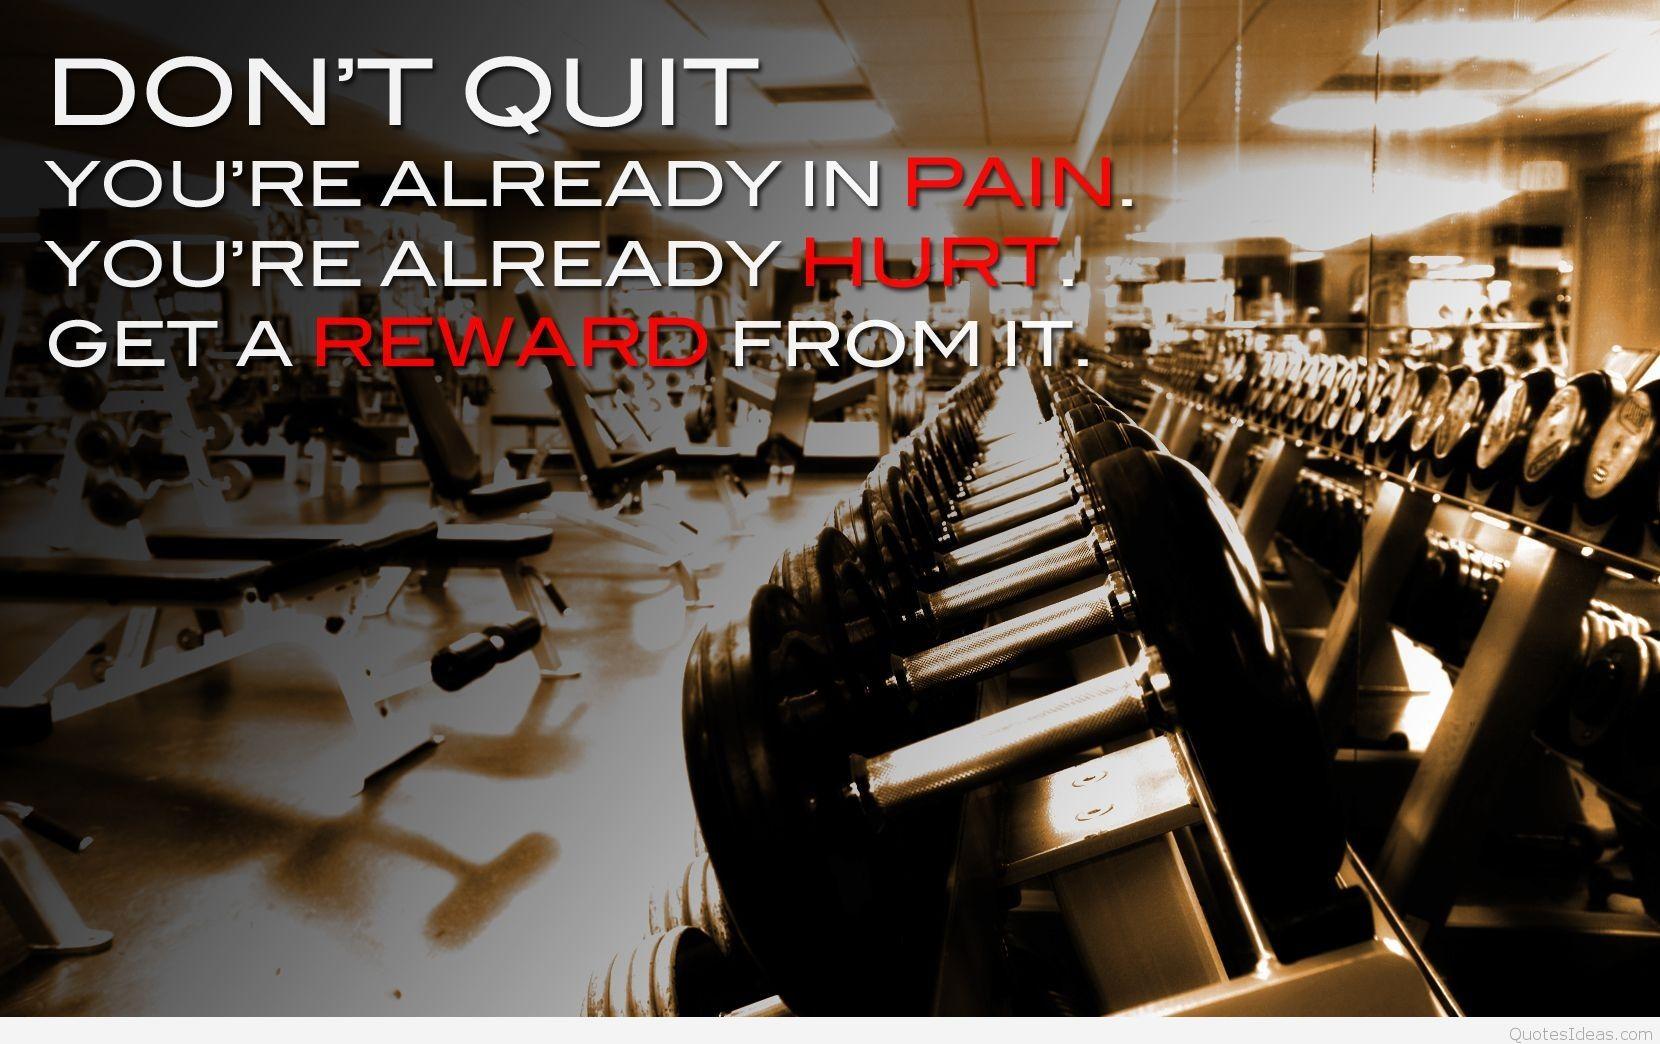 Don't quit wallpaper with bodybuilding quote